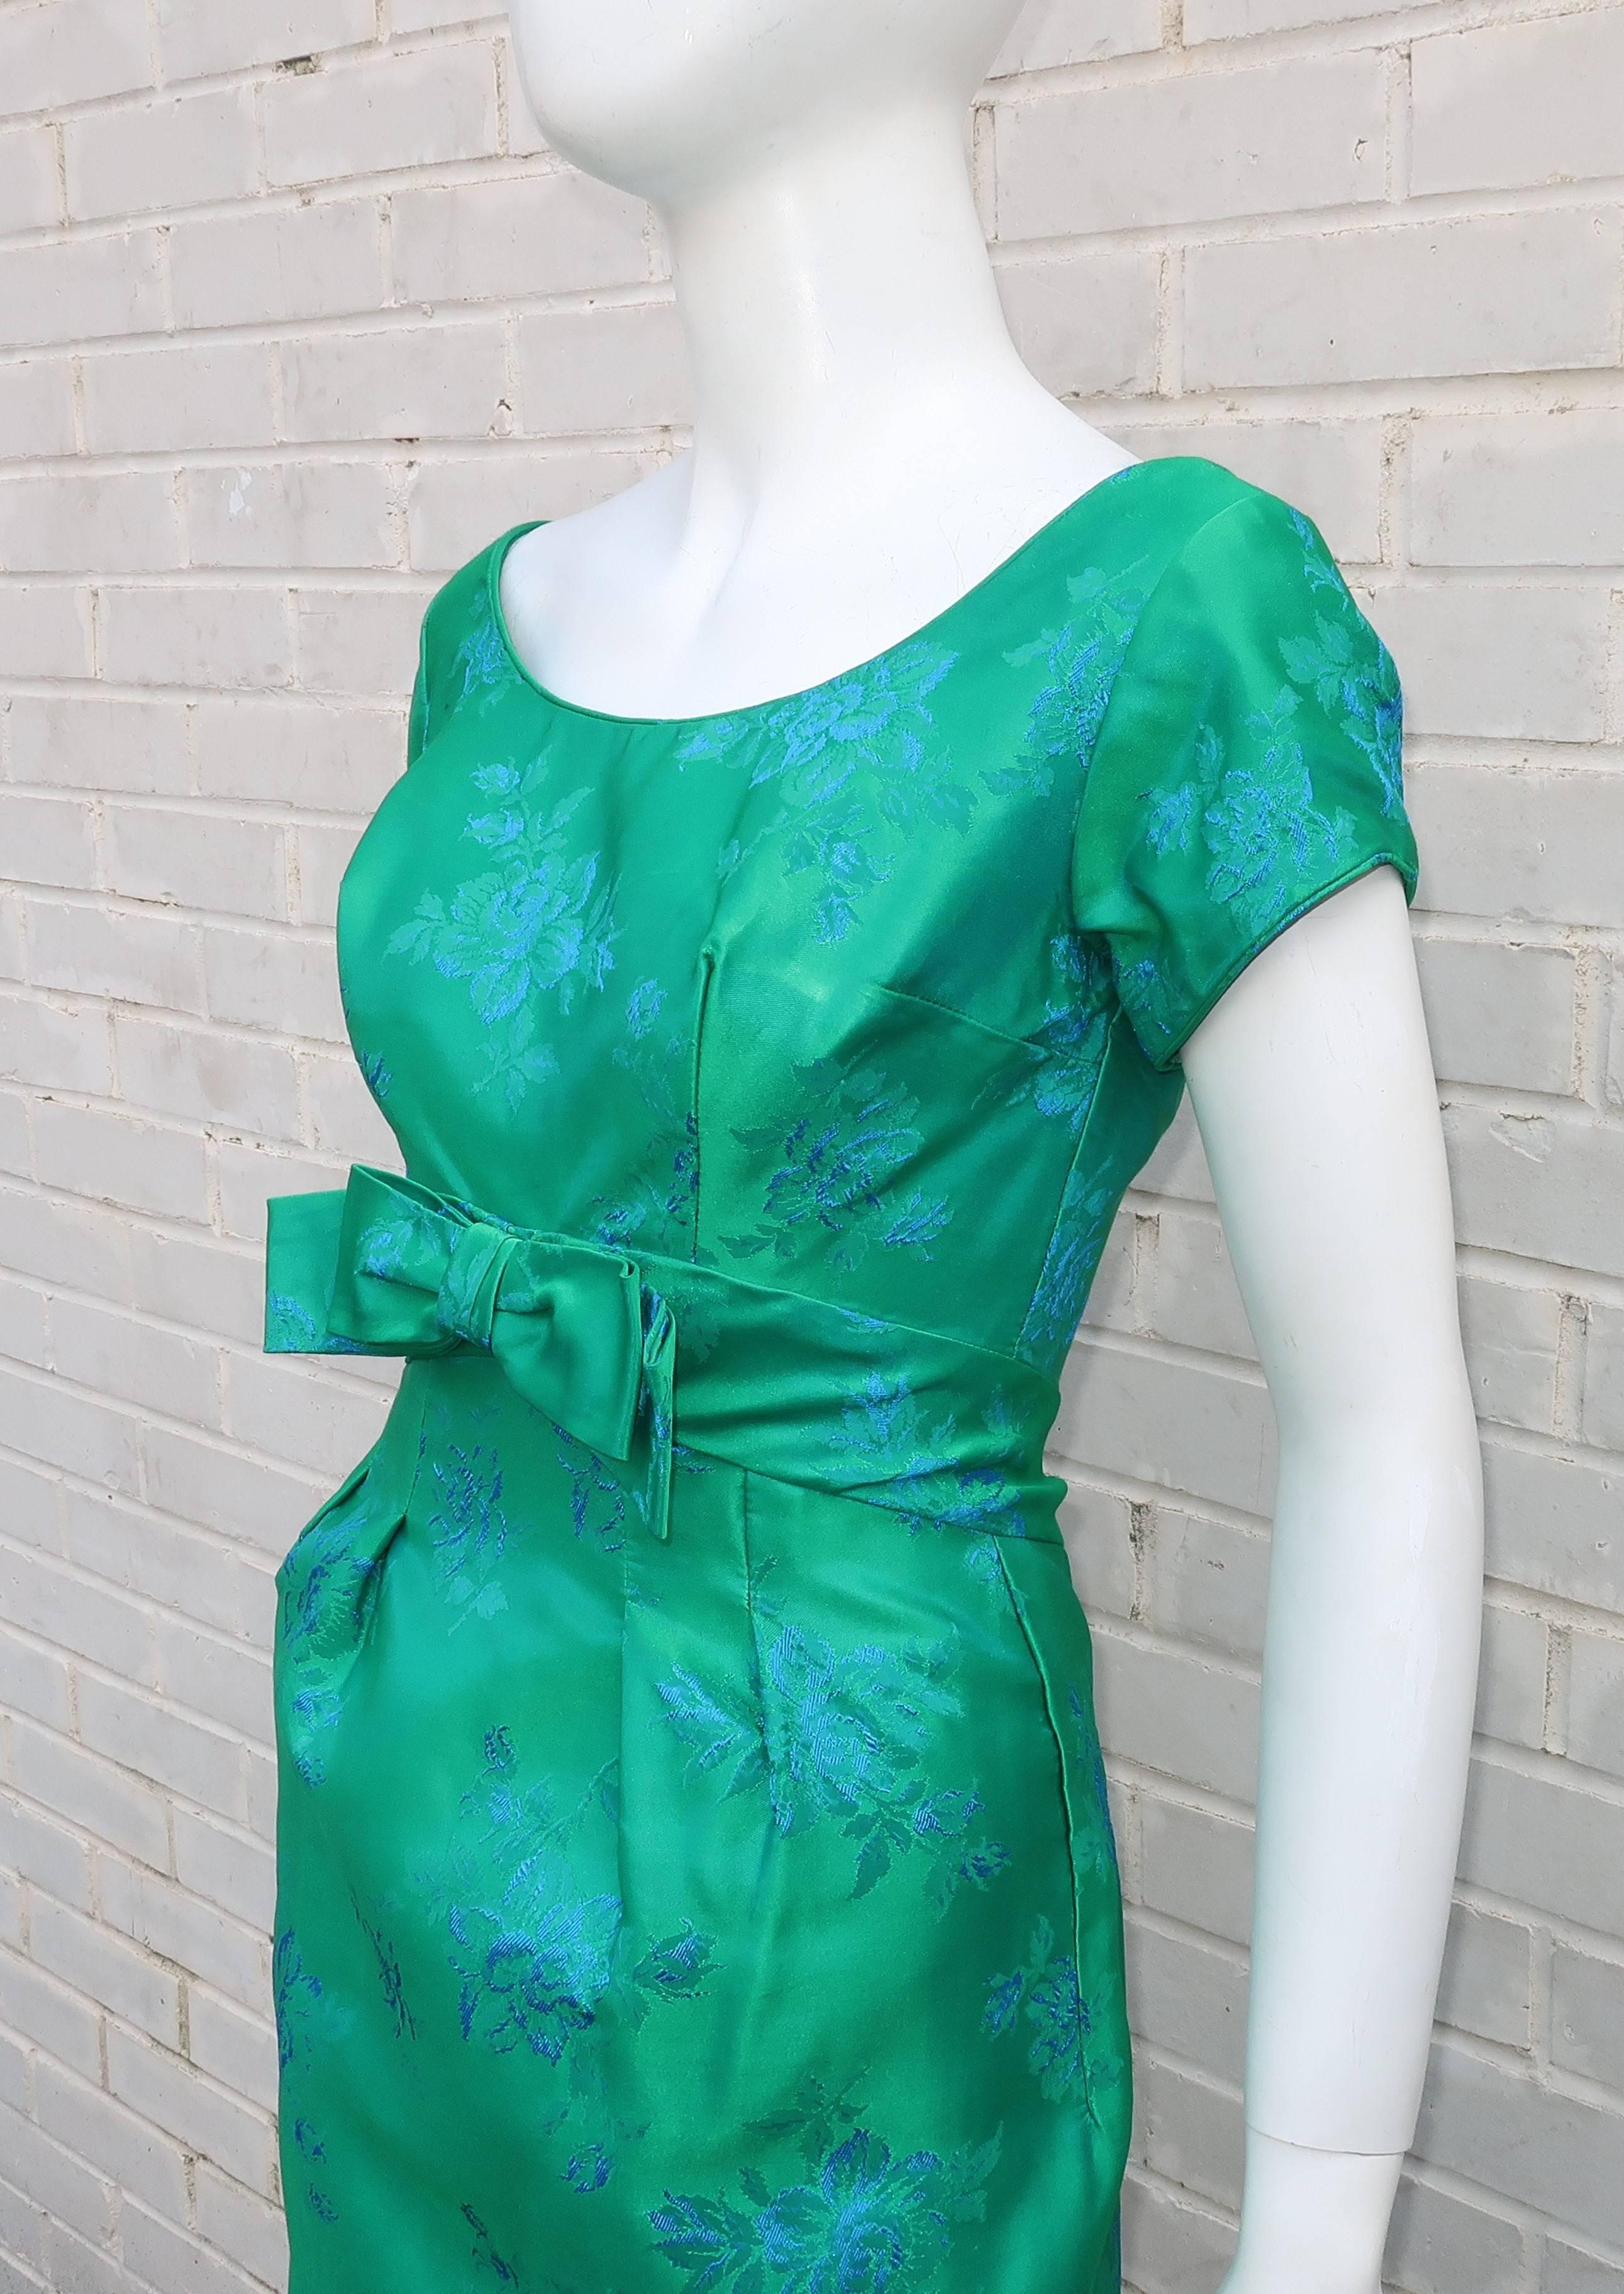 Emma Domb is the bomb!  This 1950’s bombshell dress is worthy of an houglass figure and a stylish cocktail party.  The vibrant blue and green floral brocade fabric is a beautiful backdrop for the ballerina style neckline and modified empire waist